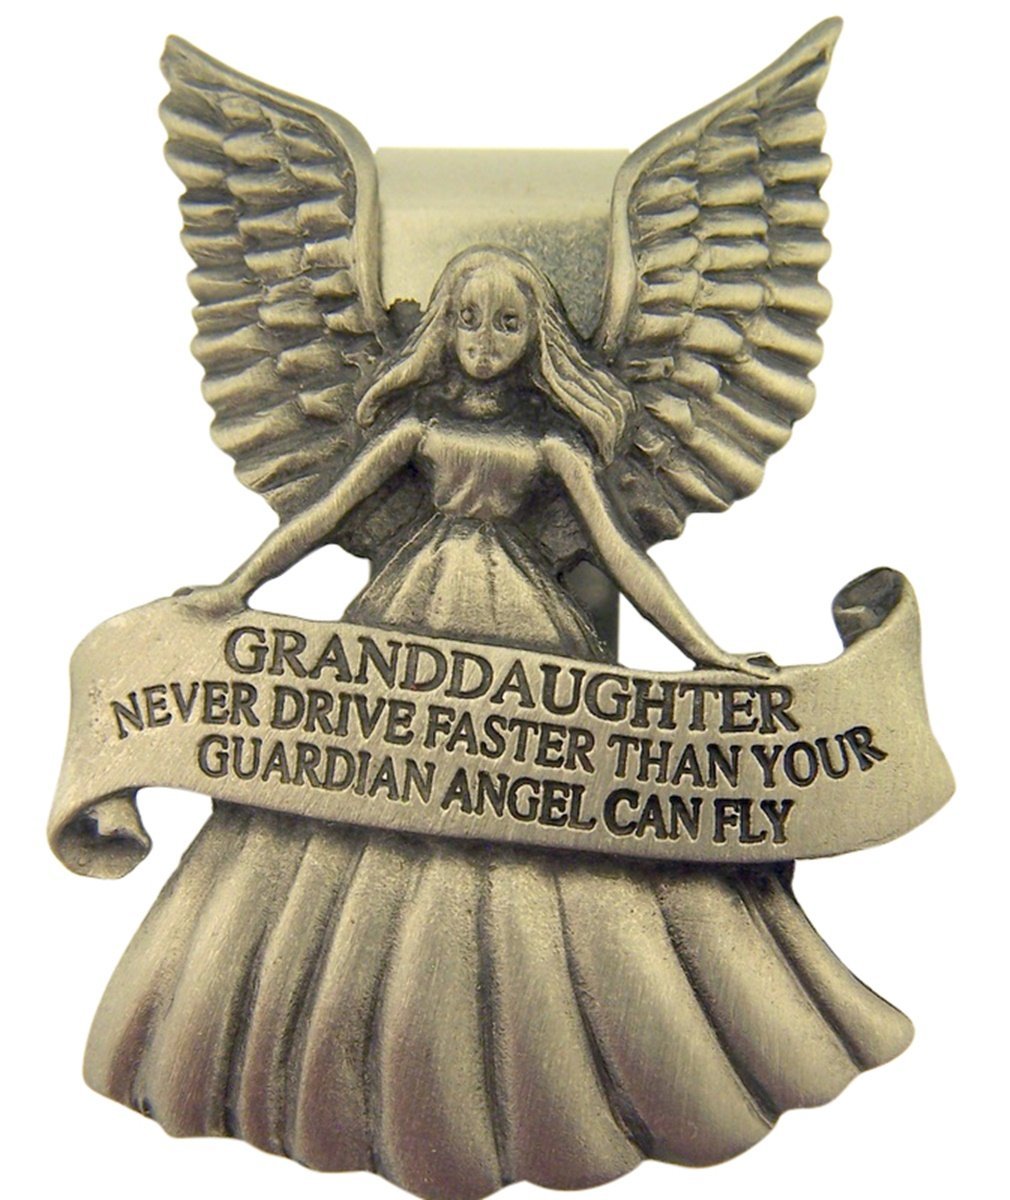  [AUSTRALIA] - Pewter Guardian Angel with Granddaughter Never Drive Faster Banner Visor Clip, 2 1/4 Inch